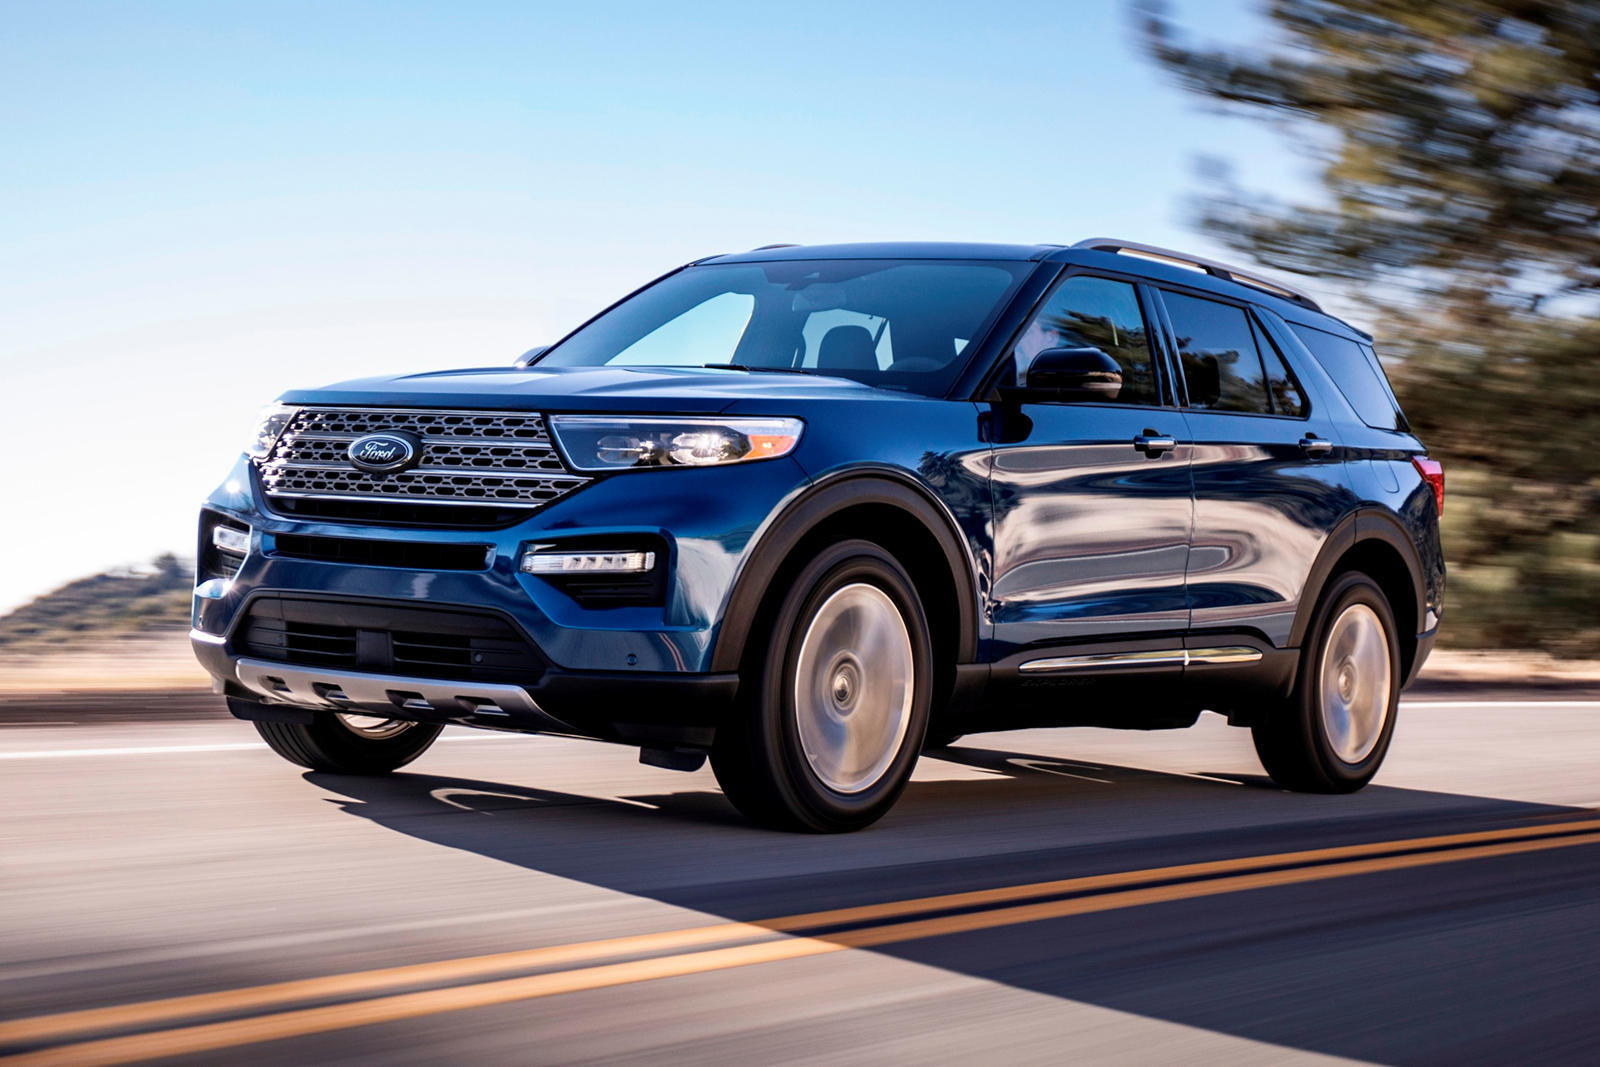 2020 Ford Explorer Can Be Equipped With Self-Healing Tires | CarBuzz